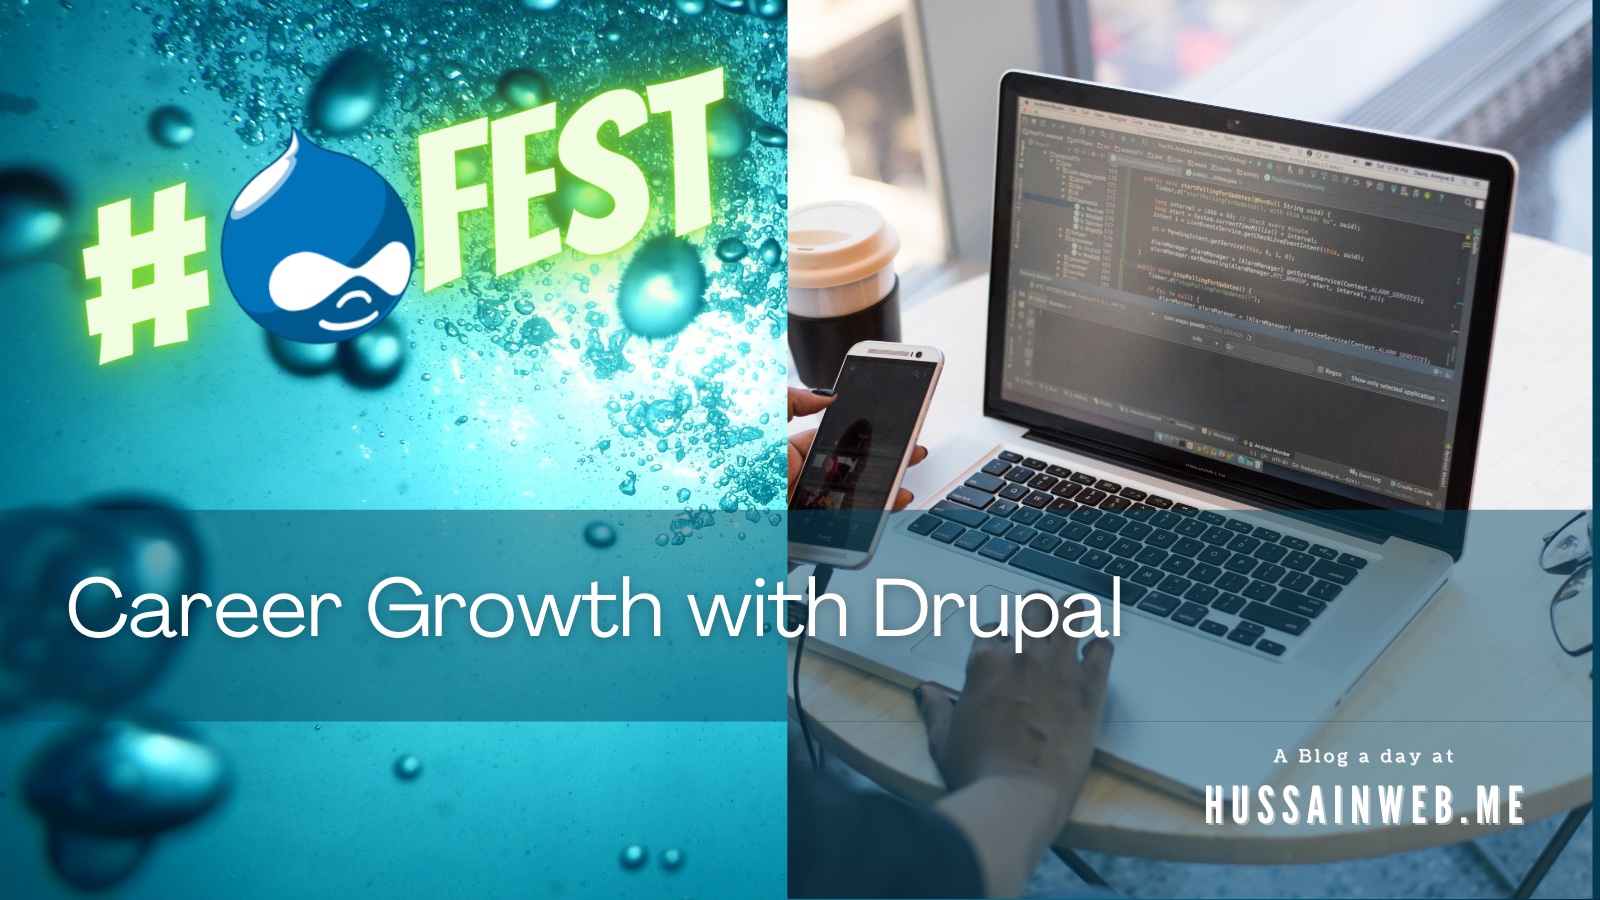 Career Growth with Drupal